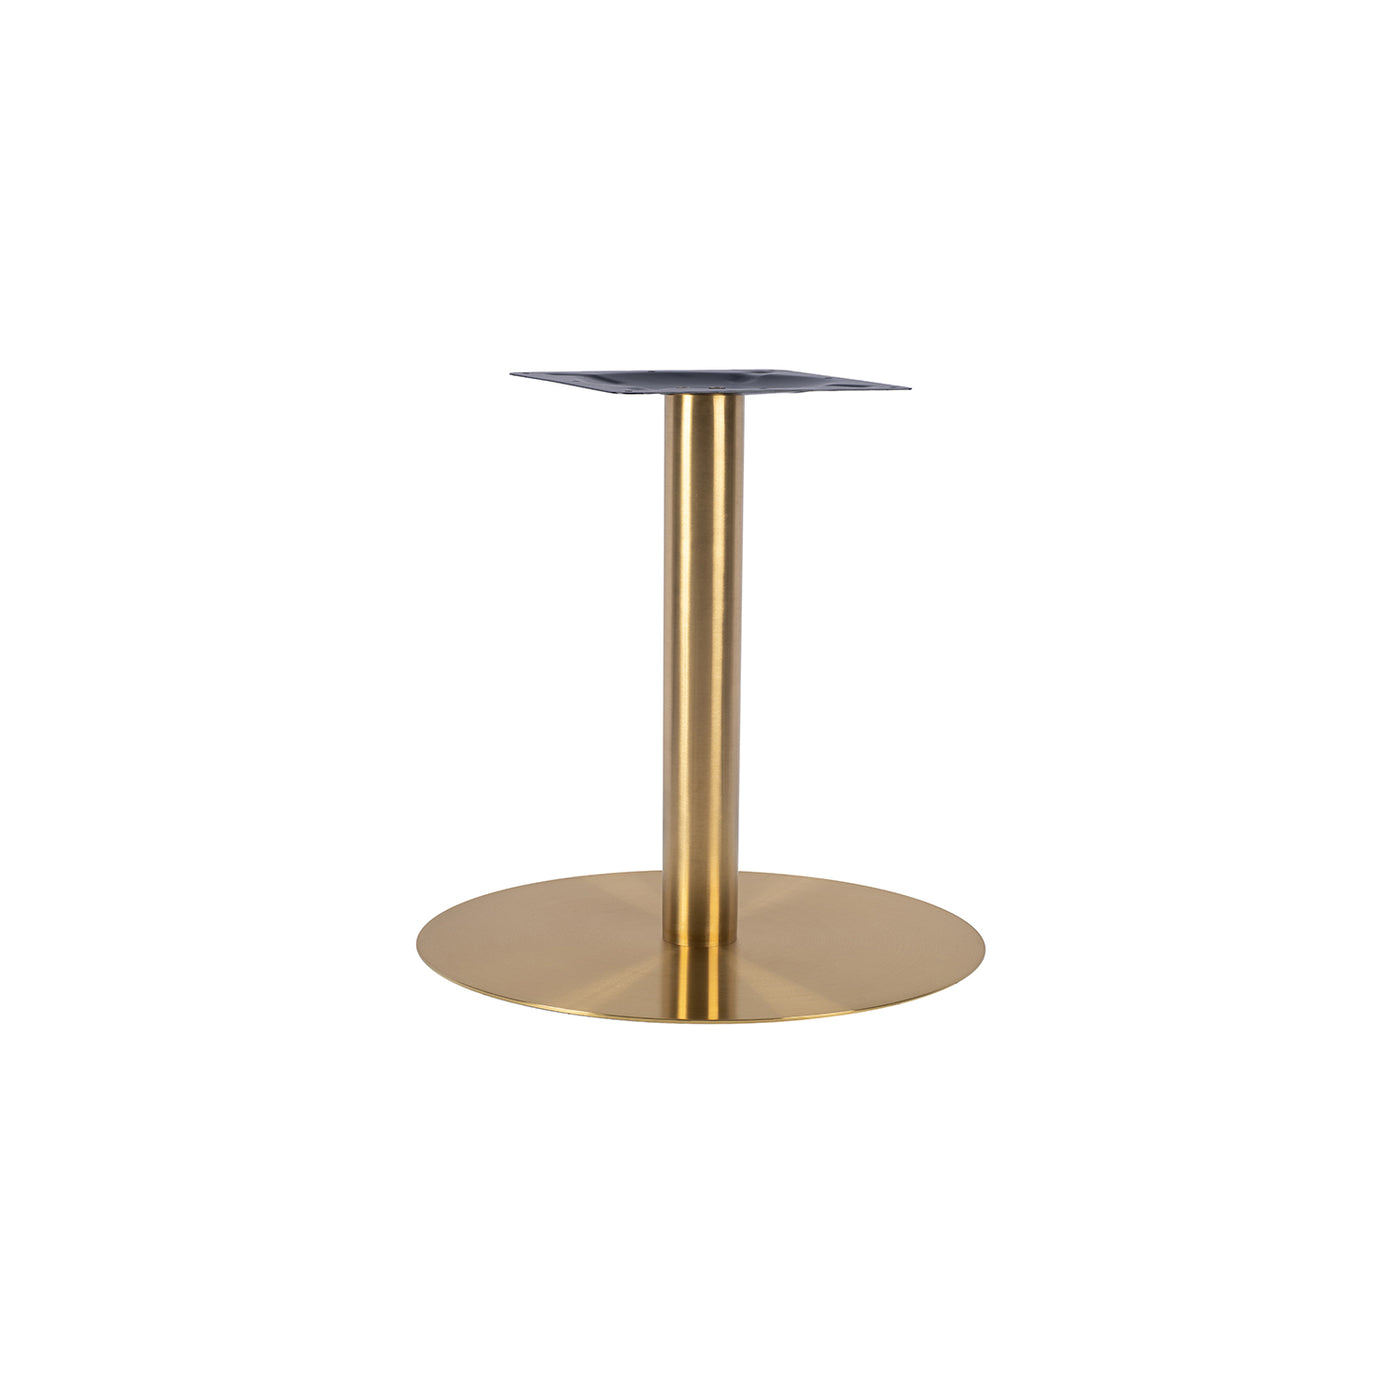 Ava Small Round Table Base - Vintage Brass